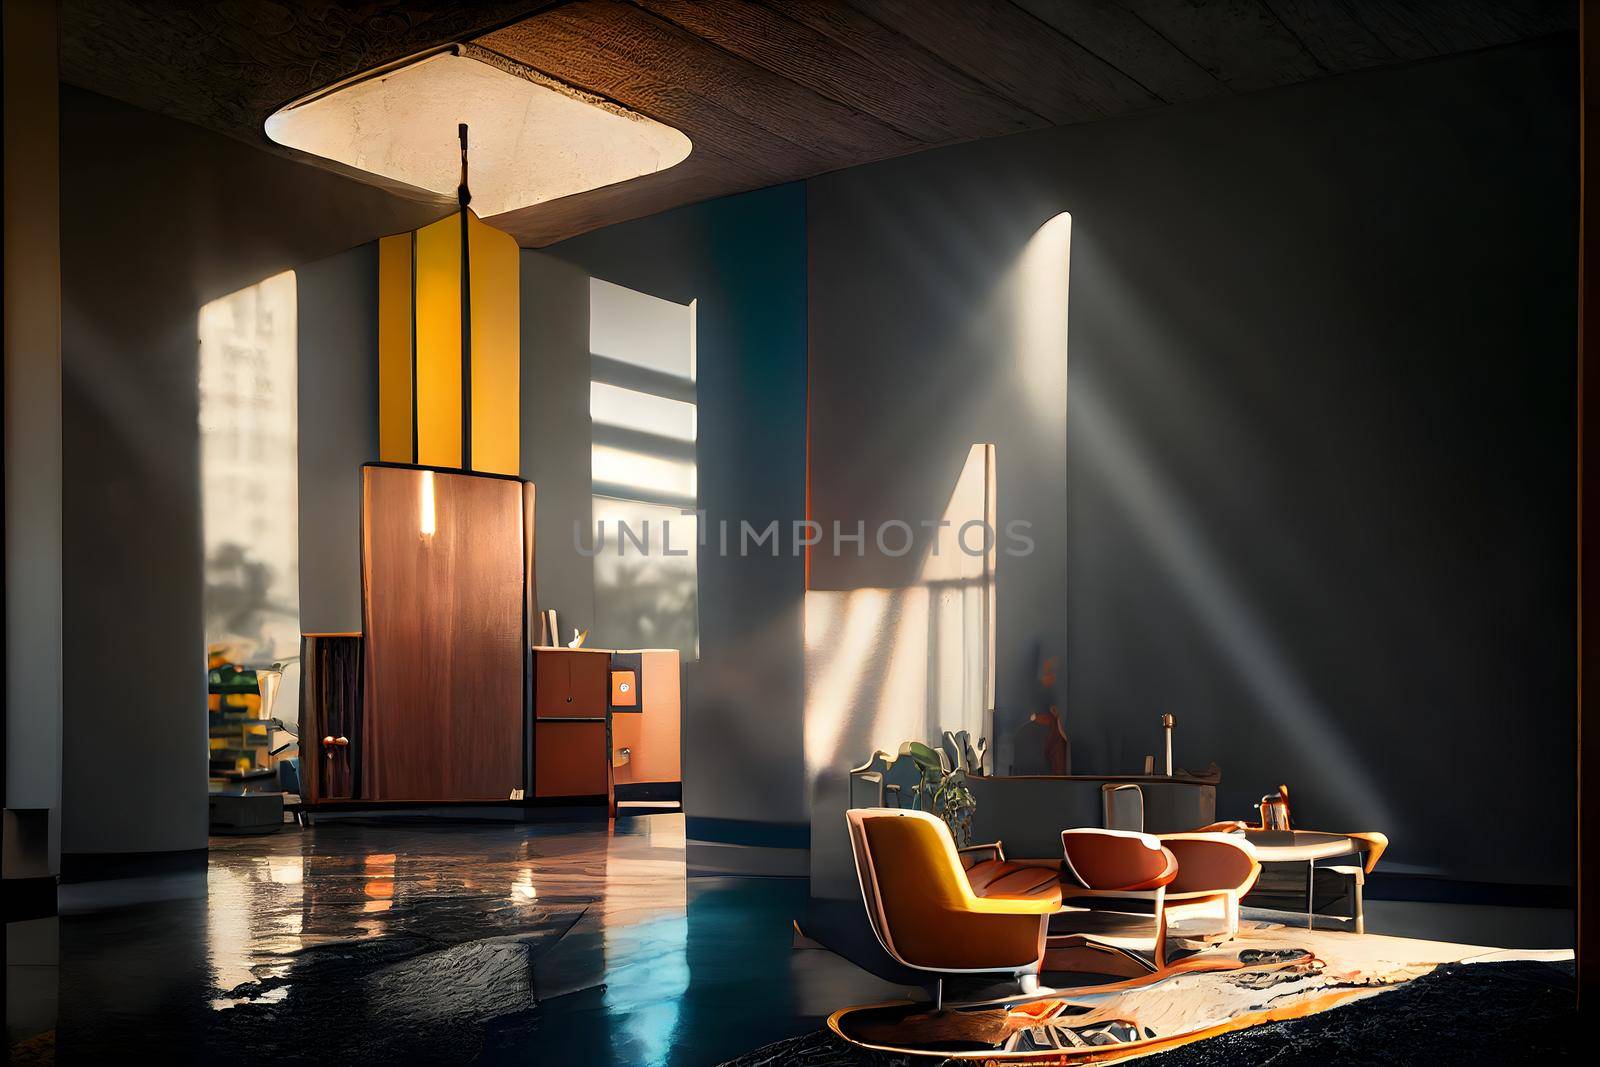 mid century modern style interior, neural network generated picture by z1b